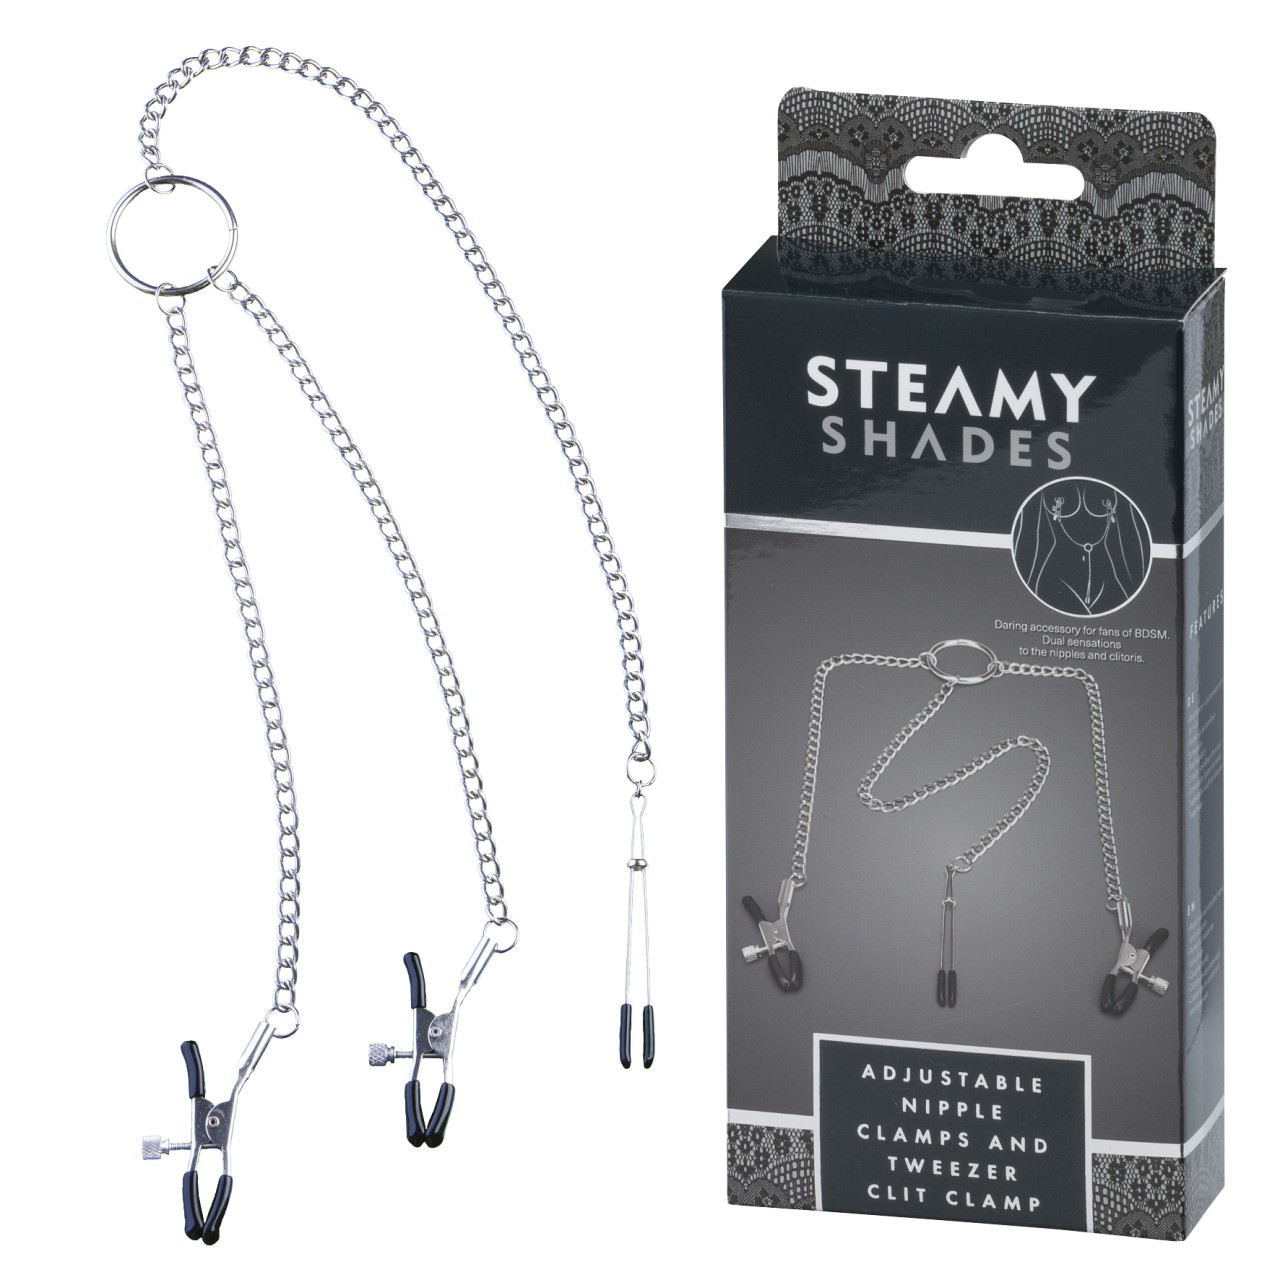 STEAMY SHADES Adjustable Nipple Clamps and Tweezer Clit Clamp